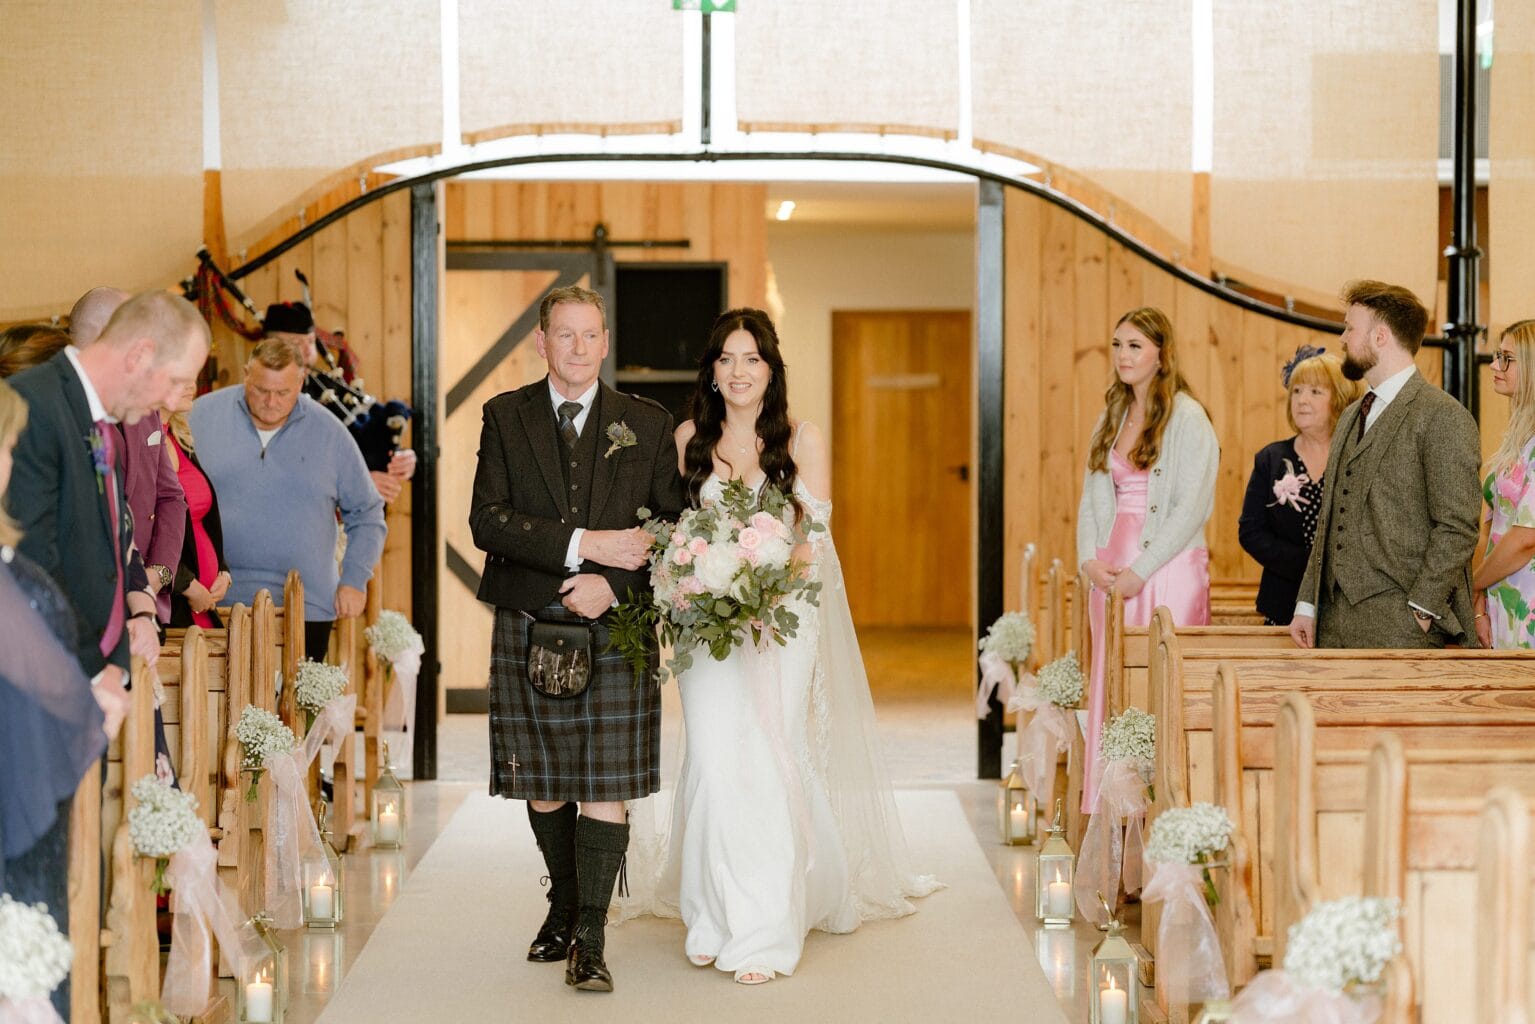 guests stand and watch as the bride and her father walk down the aisle arm in arm at barn wedding venues west lothian scotland